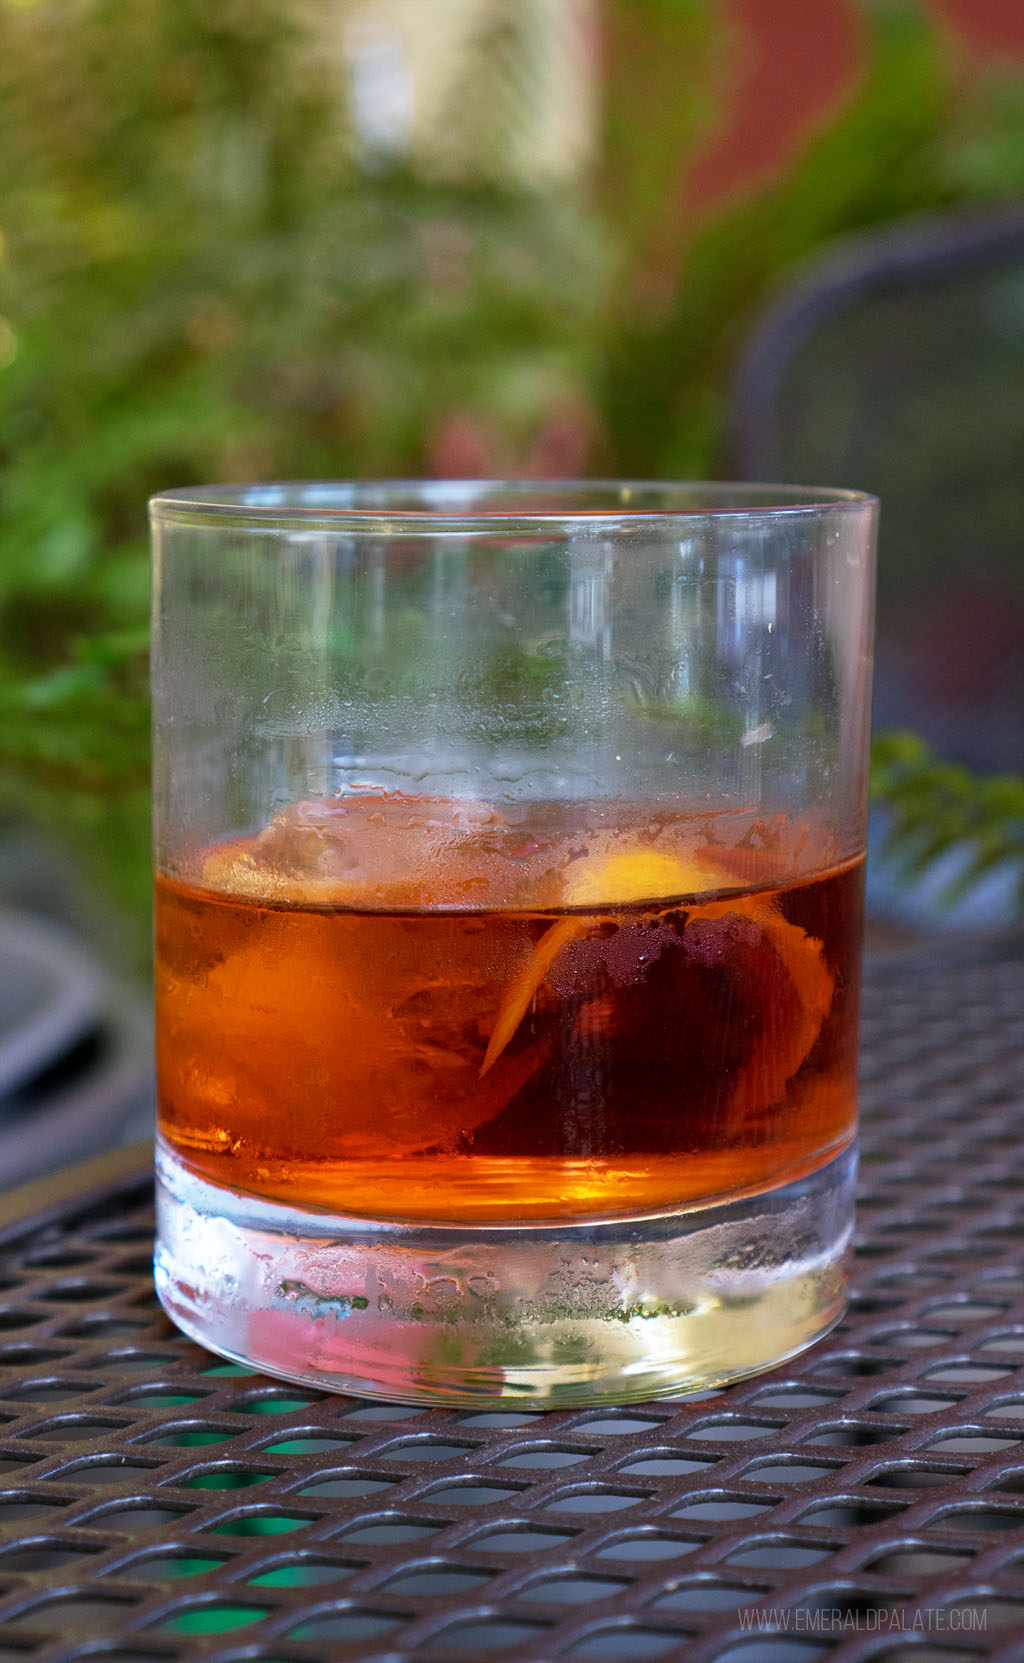 glass of Negroni cocktail made with wine